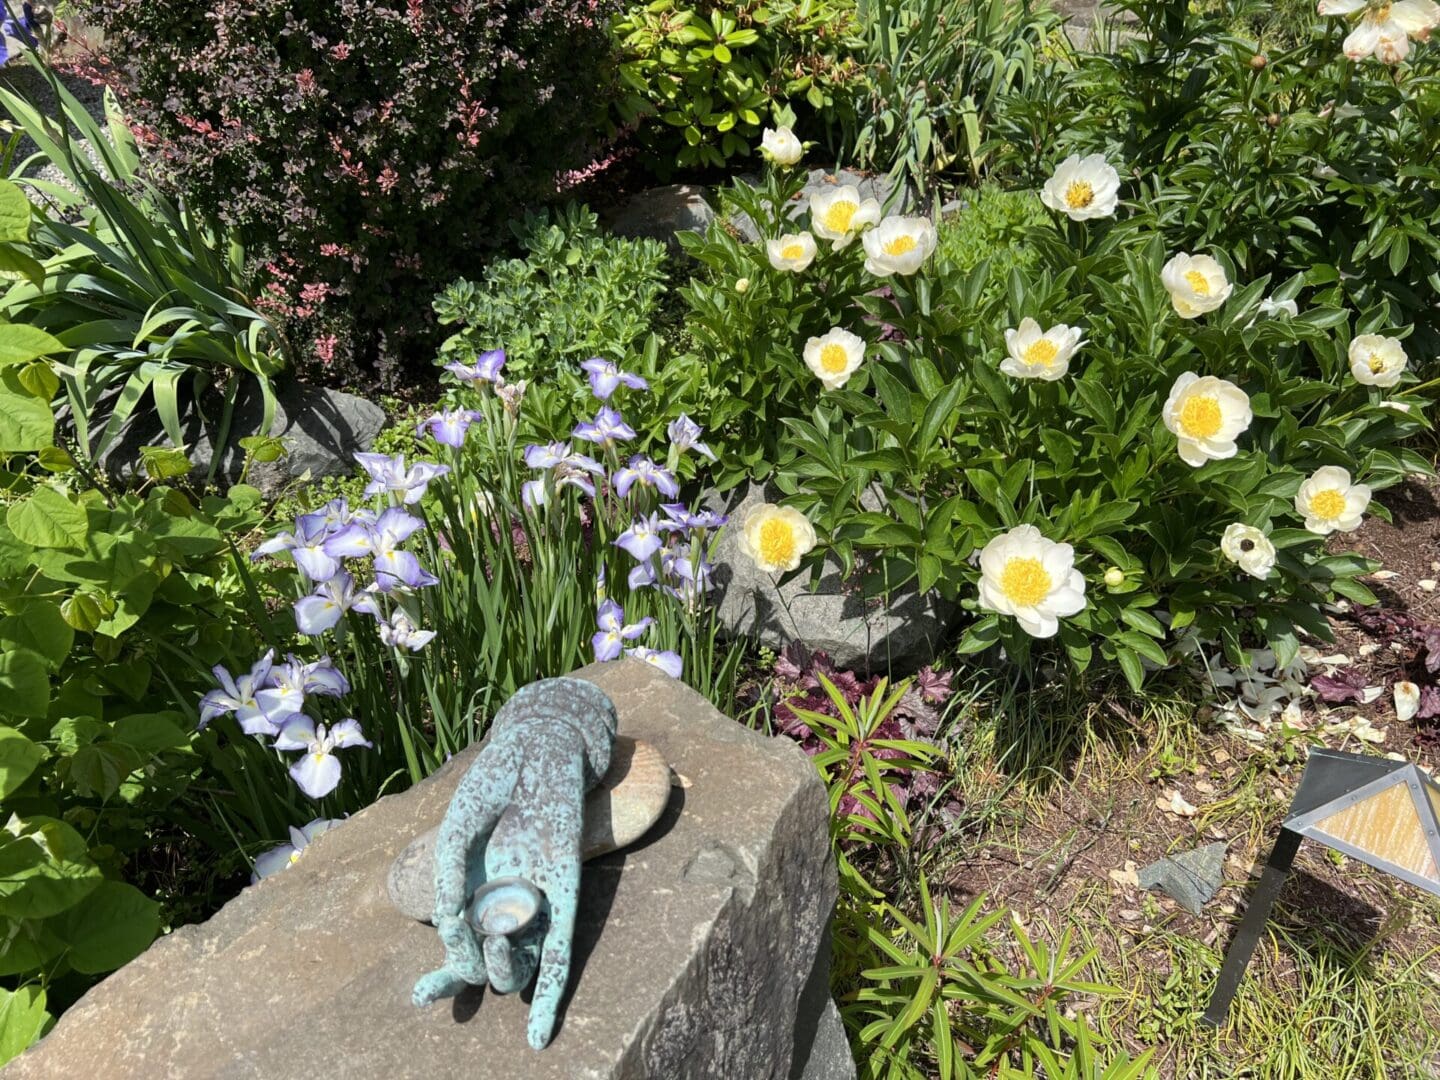 A statue of a frog on top of a rock in front of flowers.